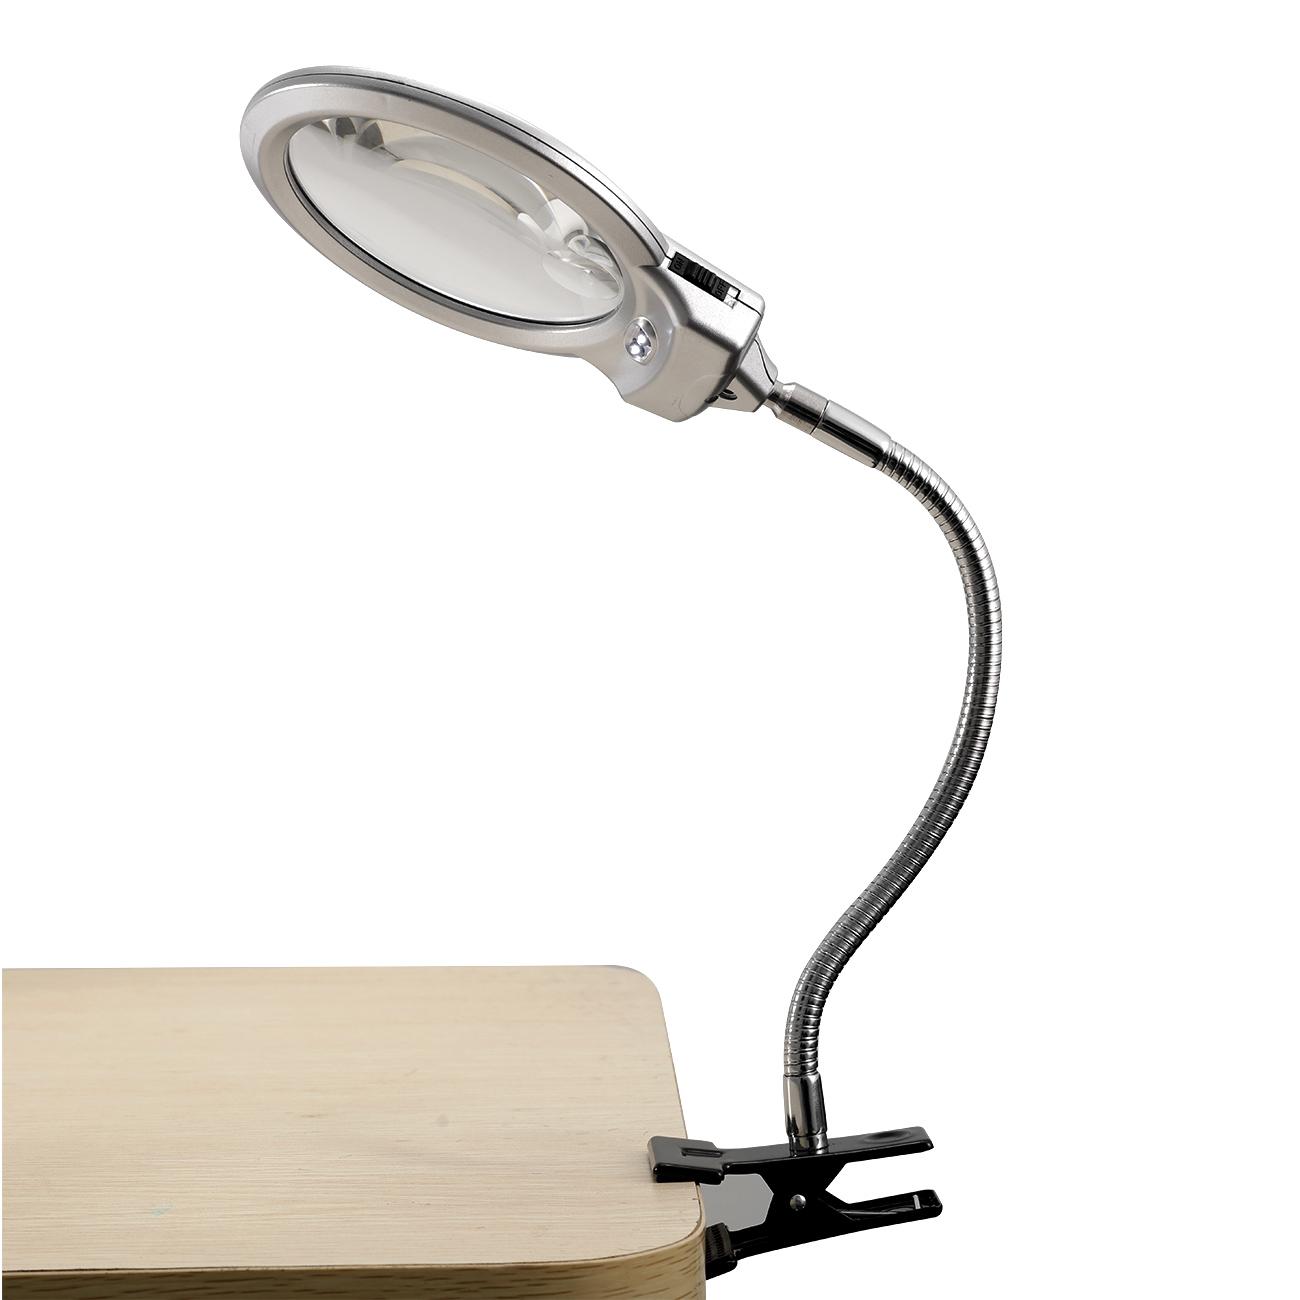 Large Lens Lighted Lamp Top Desk Magnifier Magnifying Glass With